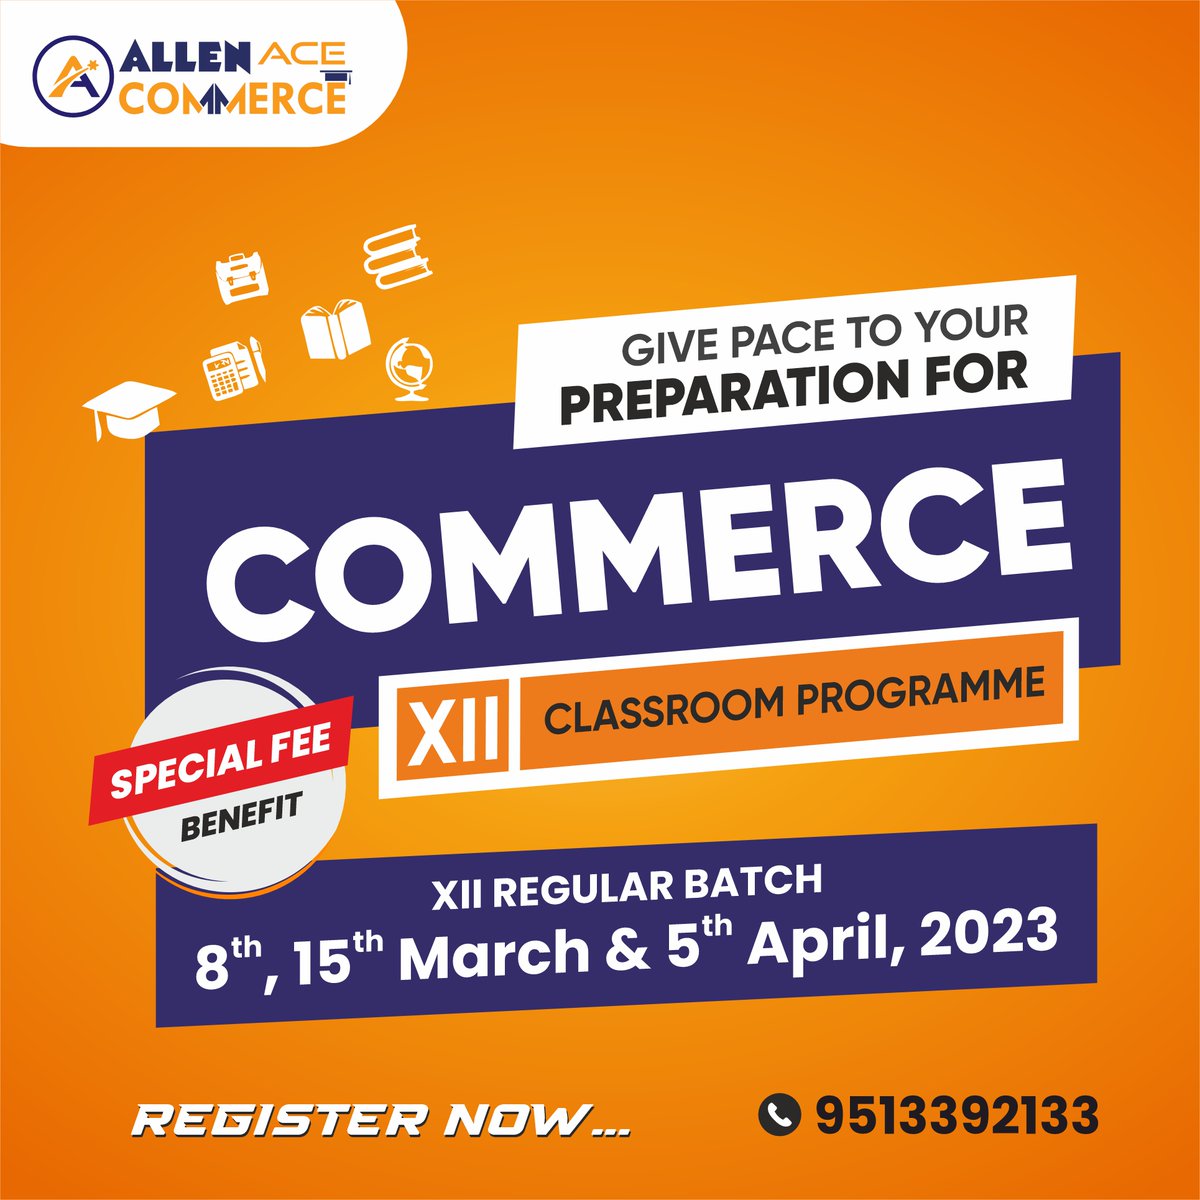 📢 Attention Students!!

Give Pace to your Preparations for #Commerce.

🗓️ #ALLENACE 12 Commerce Classroom Programme Batch will commence from 8, 15 March & 5 April 2023.

🌐  To Register, Visit: allen.ac.in/ace/jaipur/

📱 For  details contact: 9513392133